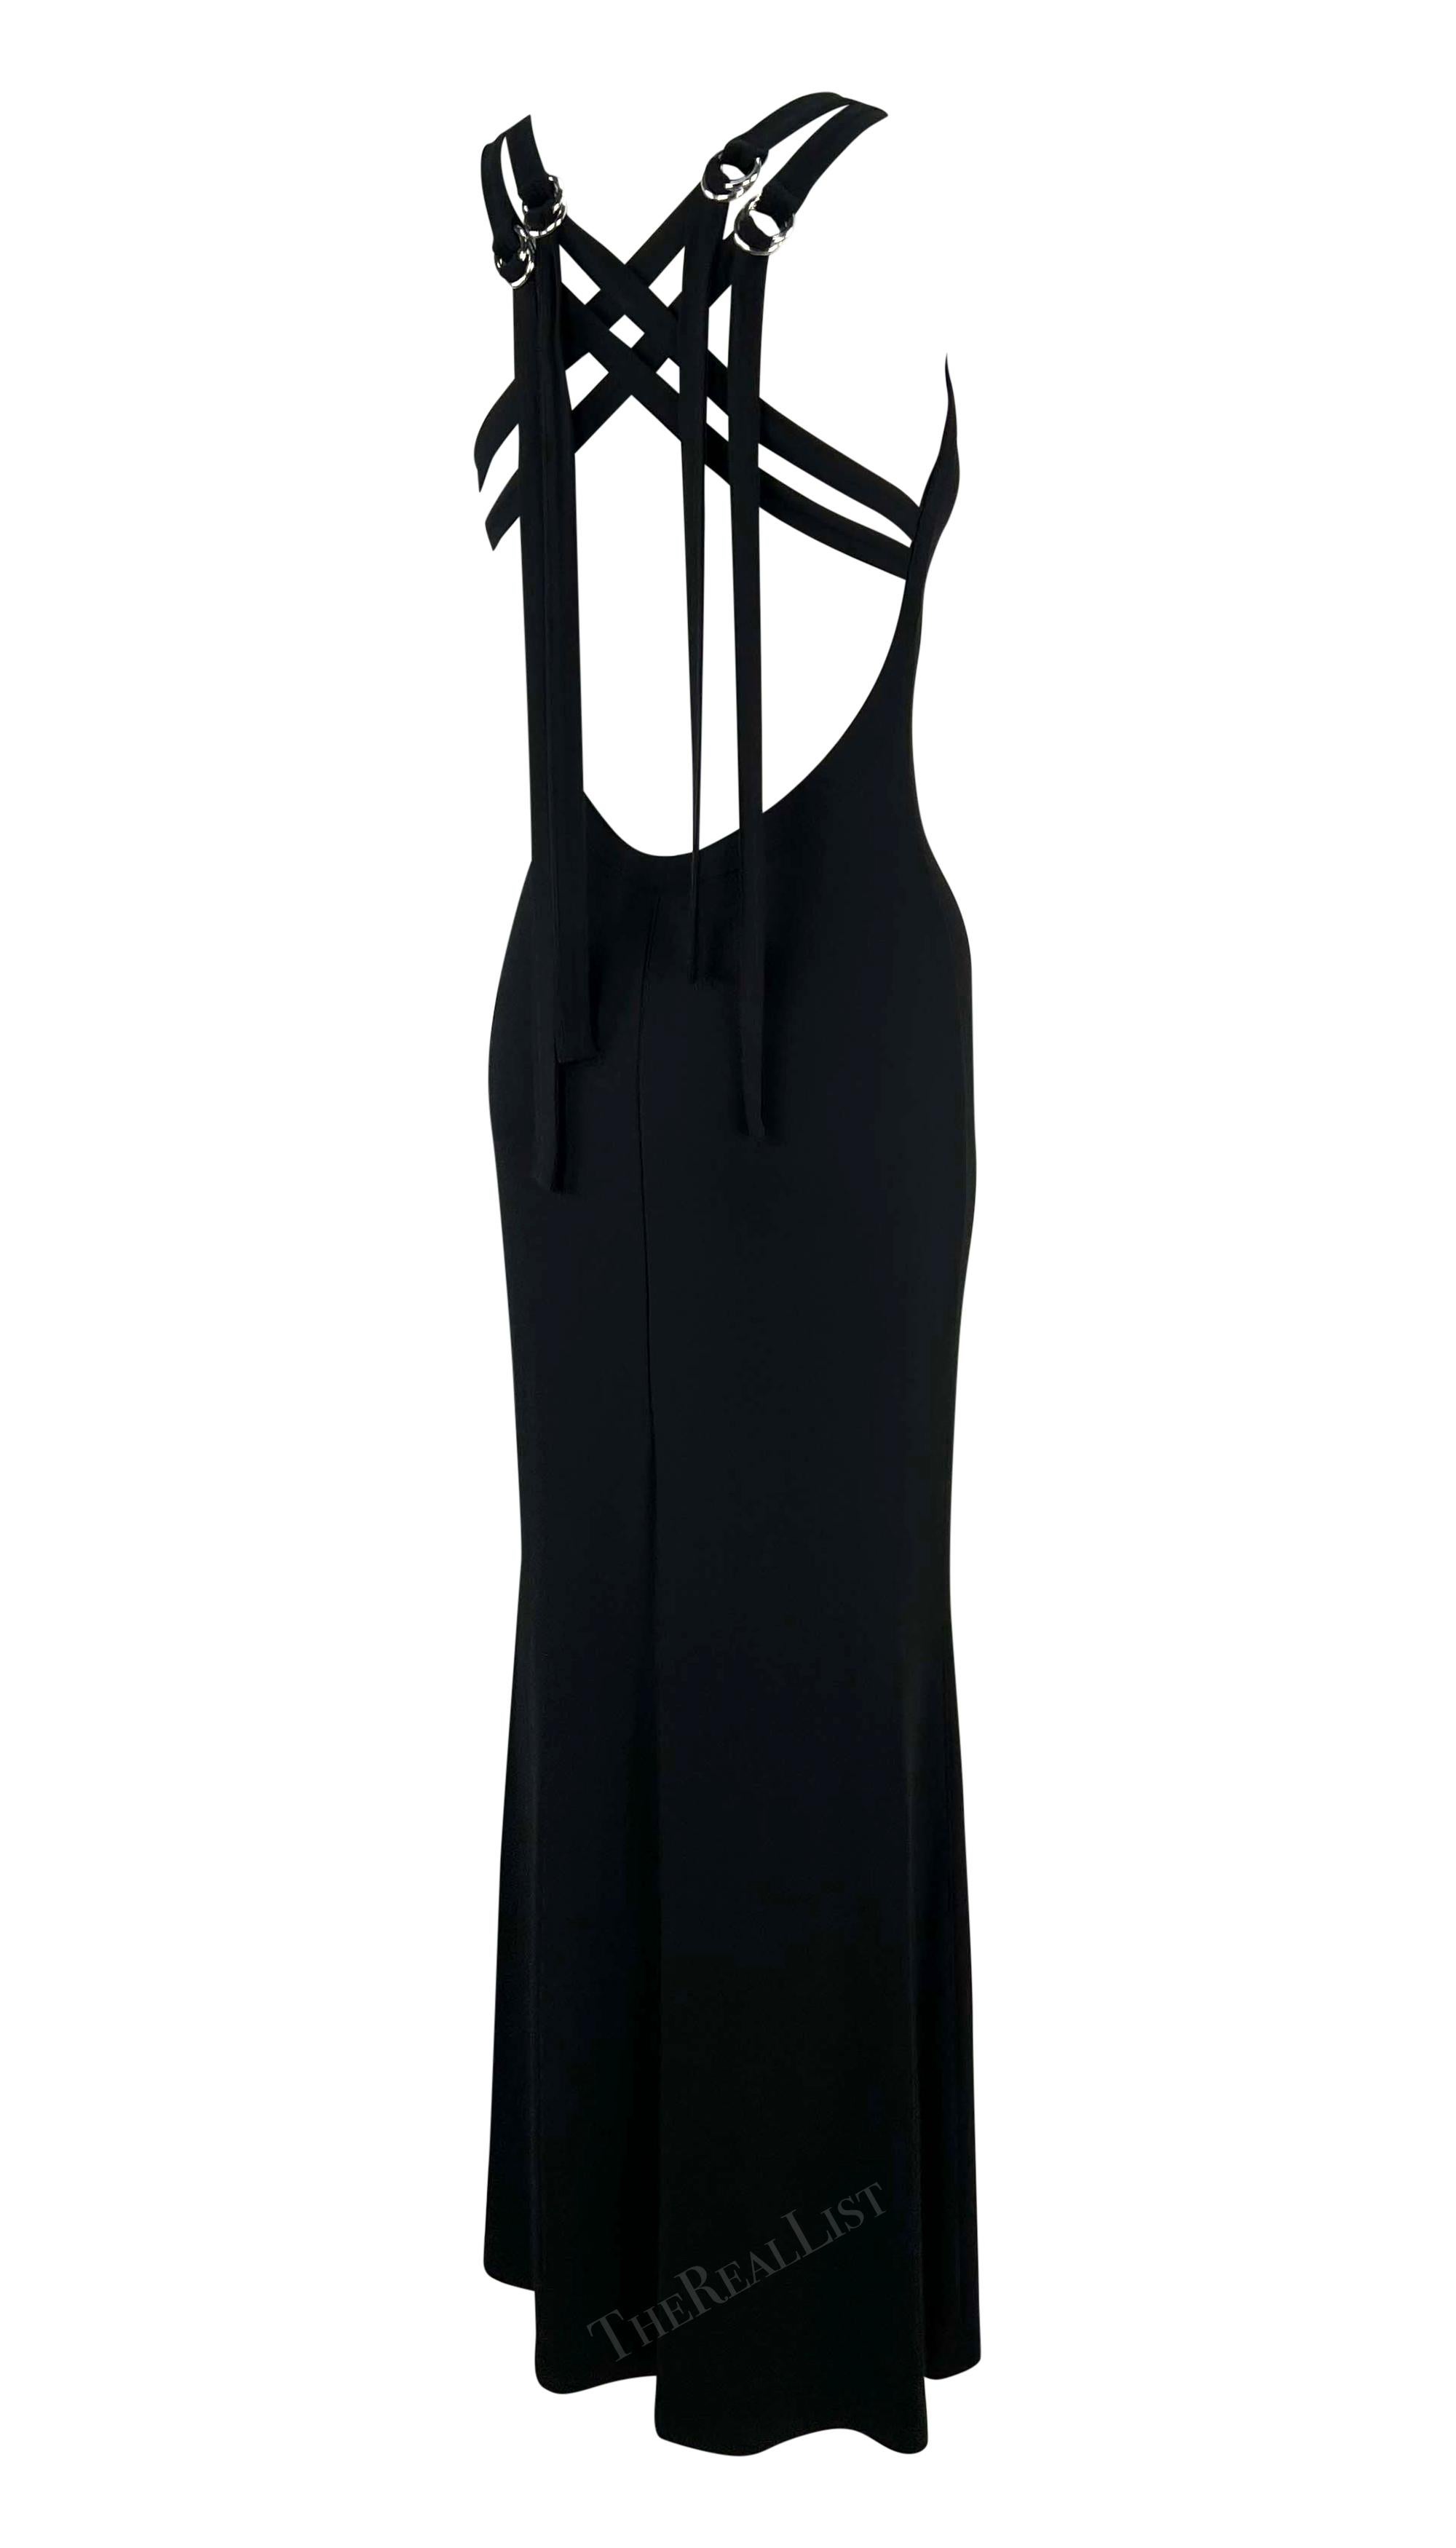 2000s Celine Black Stretchy Backless Bondage-Inspired Strap Gown In Excellent Condition For Sale In West Hollywood, CA